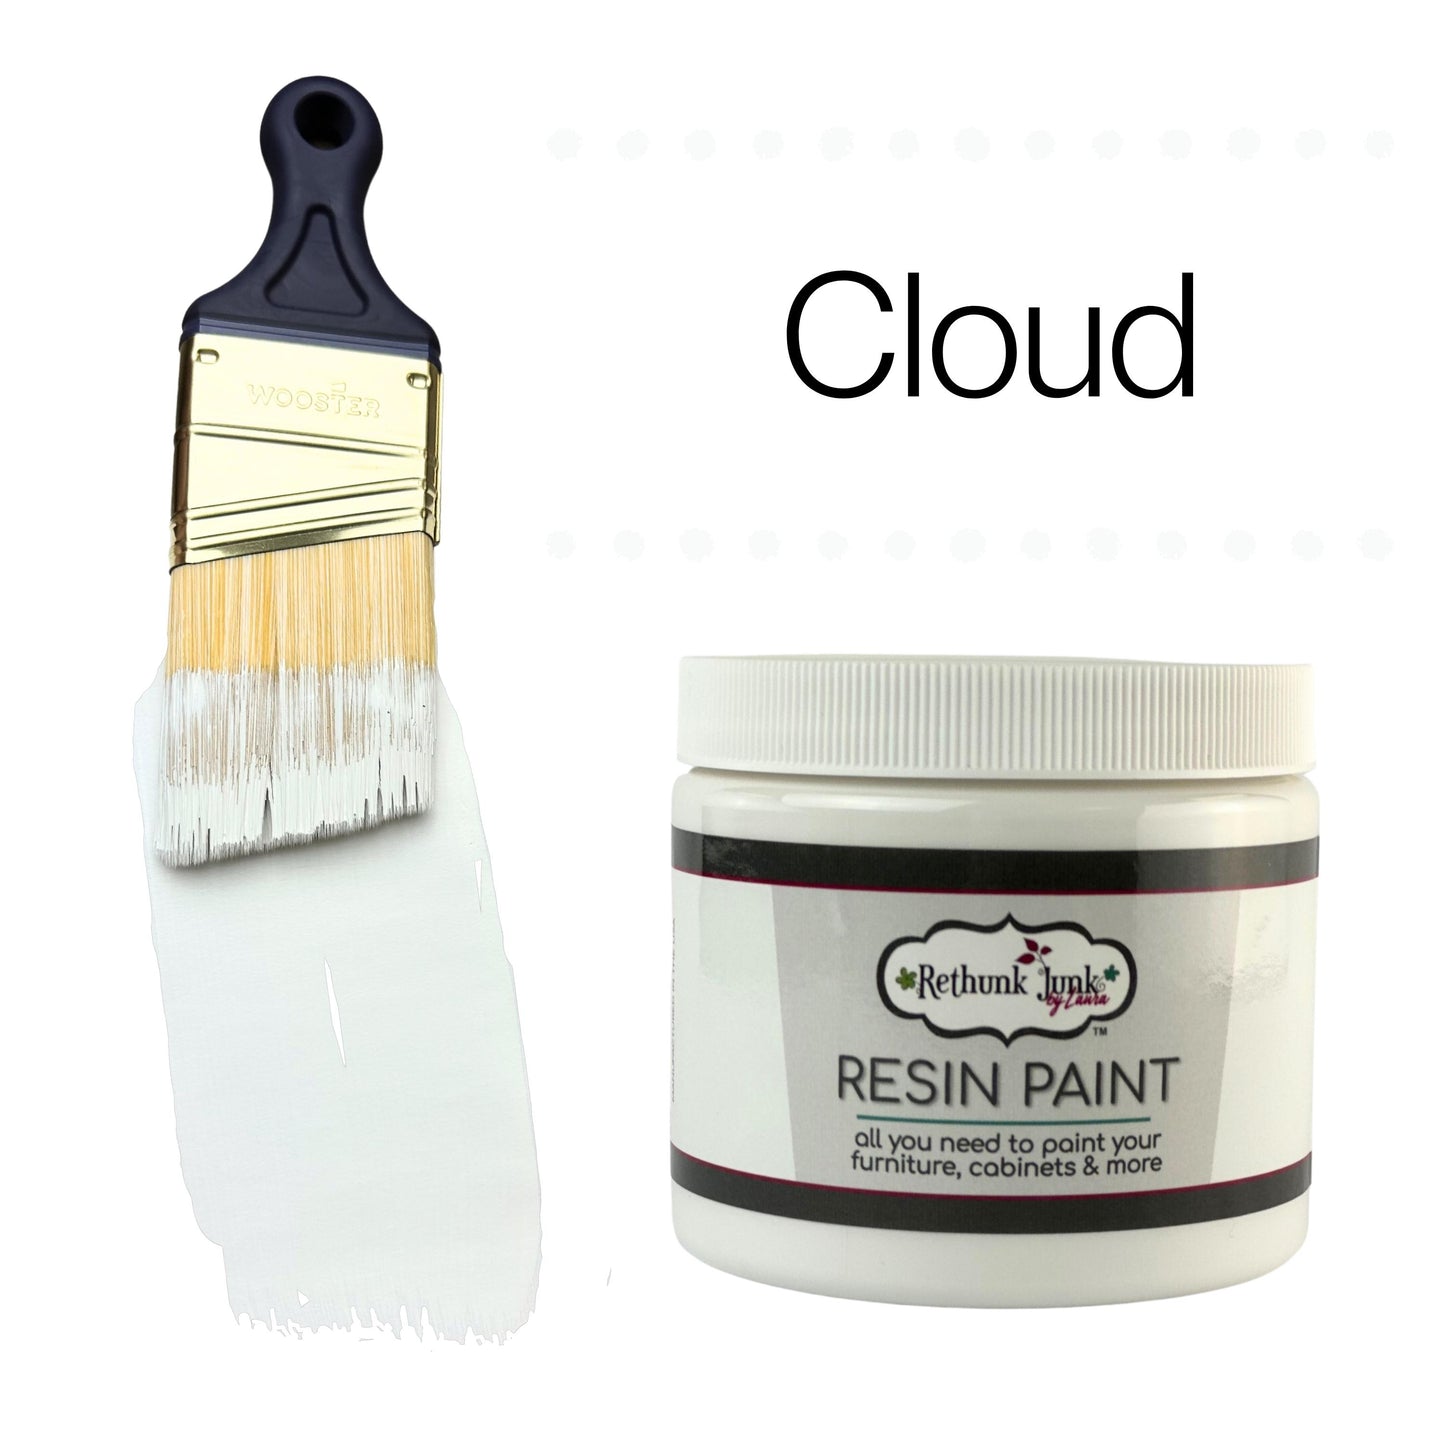 Rethunk Junk Resin Paint in Cloud